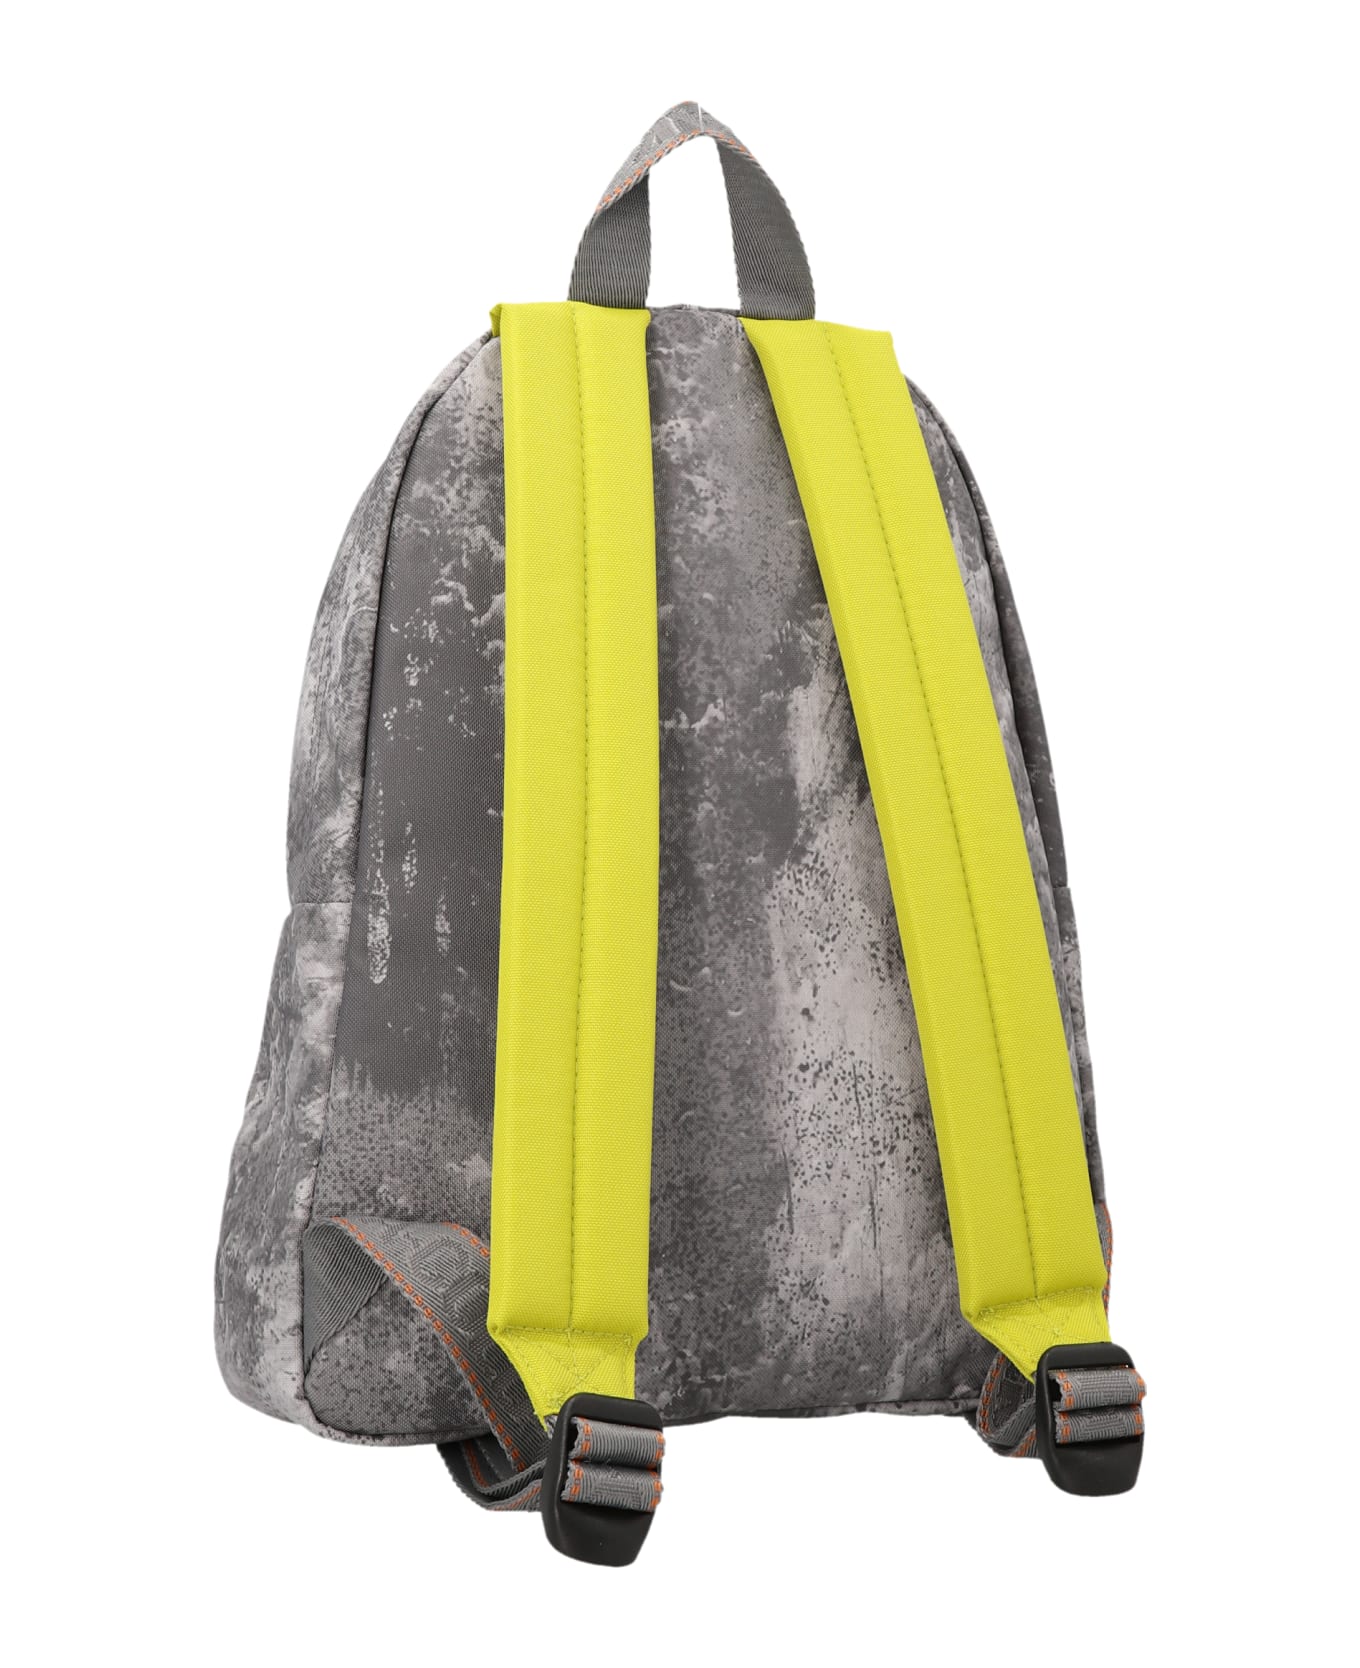 A-COLD-WALL * X Eastpak Backpack - Multicolor